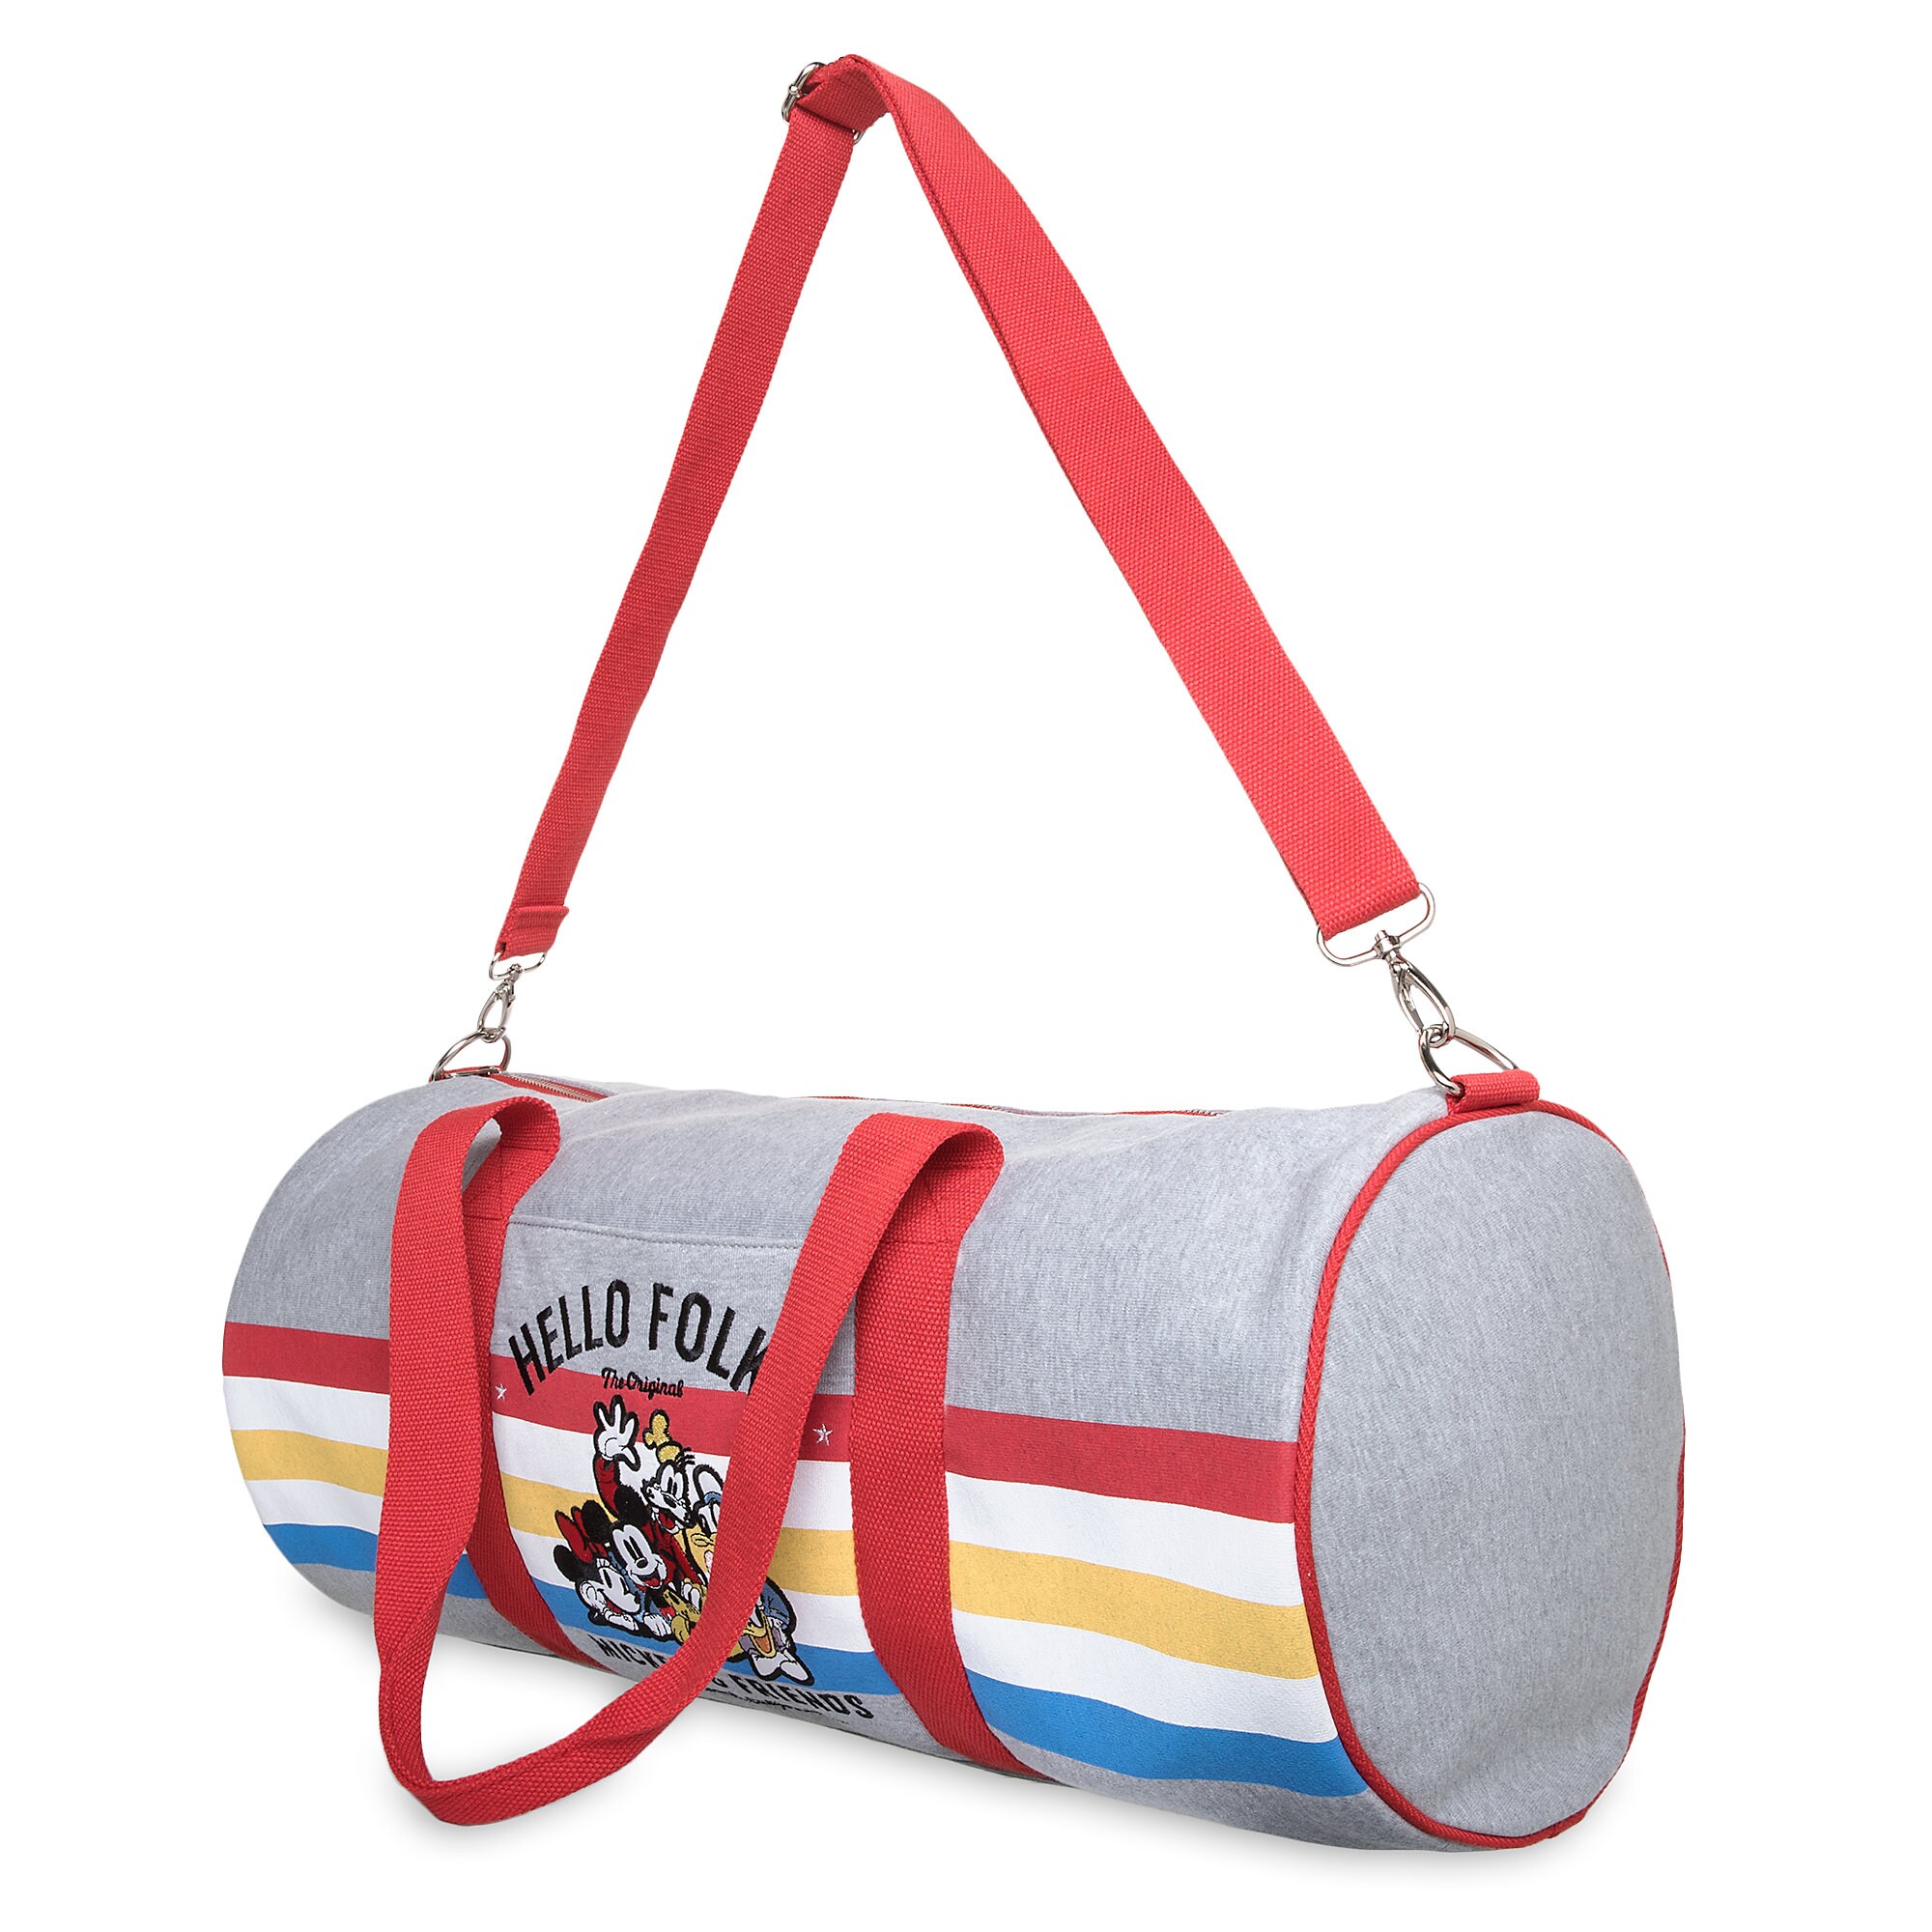 Mickey Mouse and Friends Duffel Bag